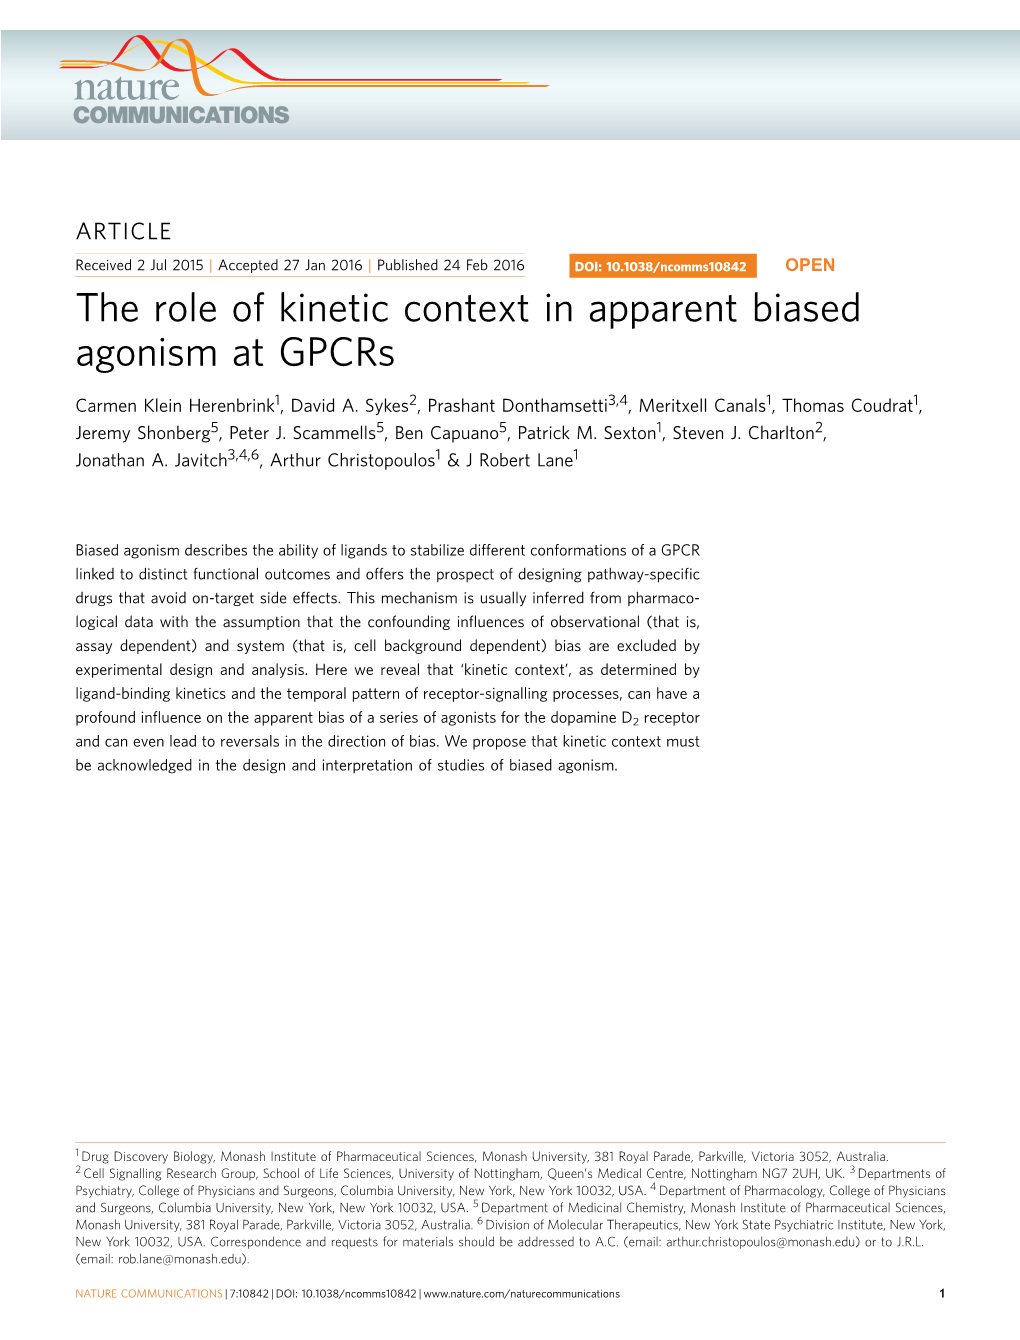 The Role of Kinetic Context in Apparent Biased Agonism at Gpcrs